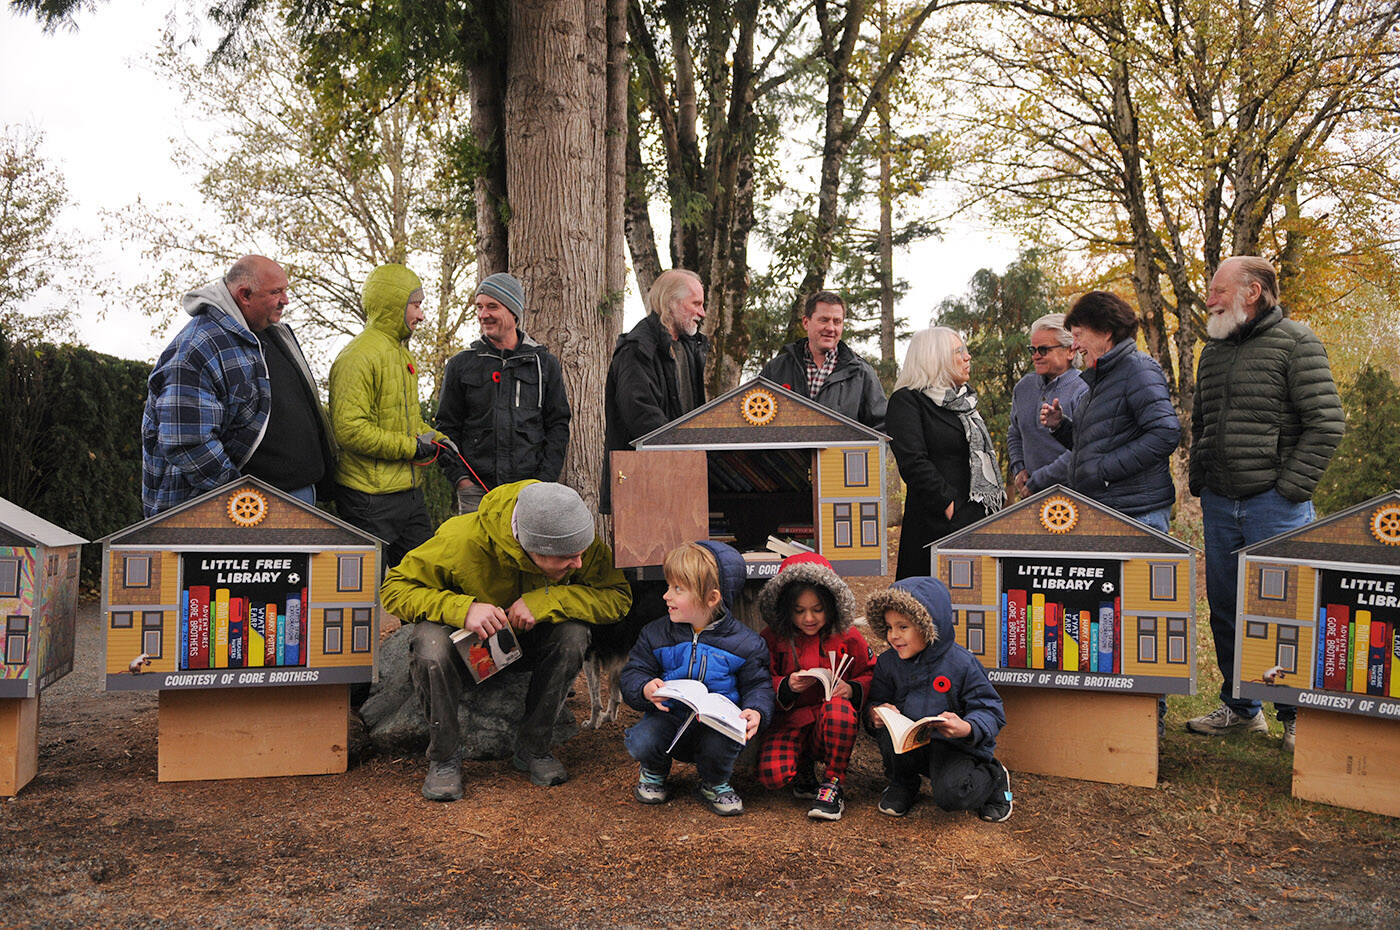 The five book houses with murals on them were unveiled at Fairfield Park in Chilliwack on Thursday, Nov. 10, 2022. Front row (from left): Chilliwack artist Jack Hendsbee, six-year-old Jack Gore, five-year-old Naomi Gore and seven-year-old Wyatt Gore were all part of the project. (Jenna Hauck/ Chilliwack Progress)